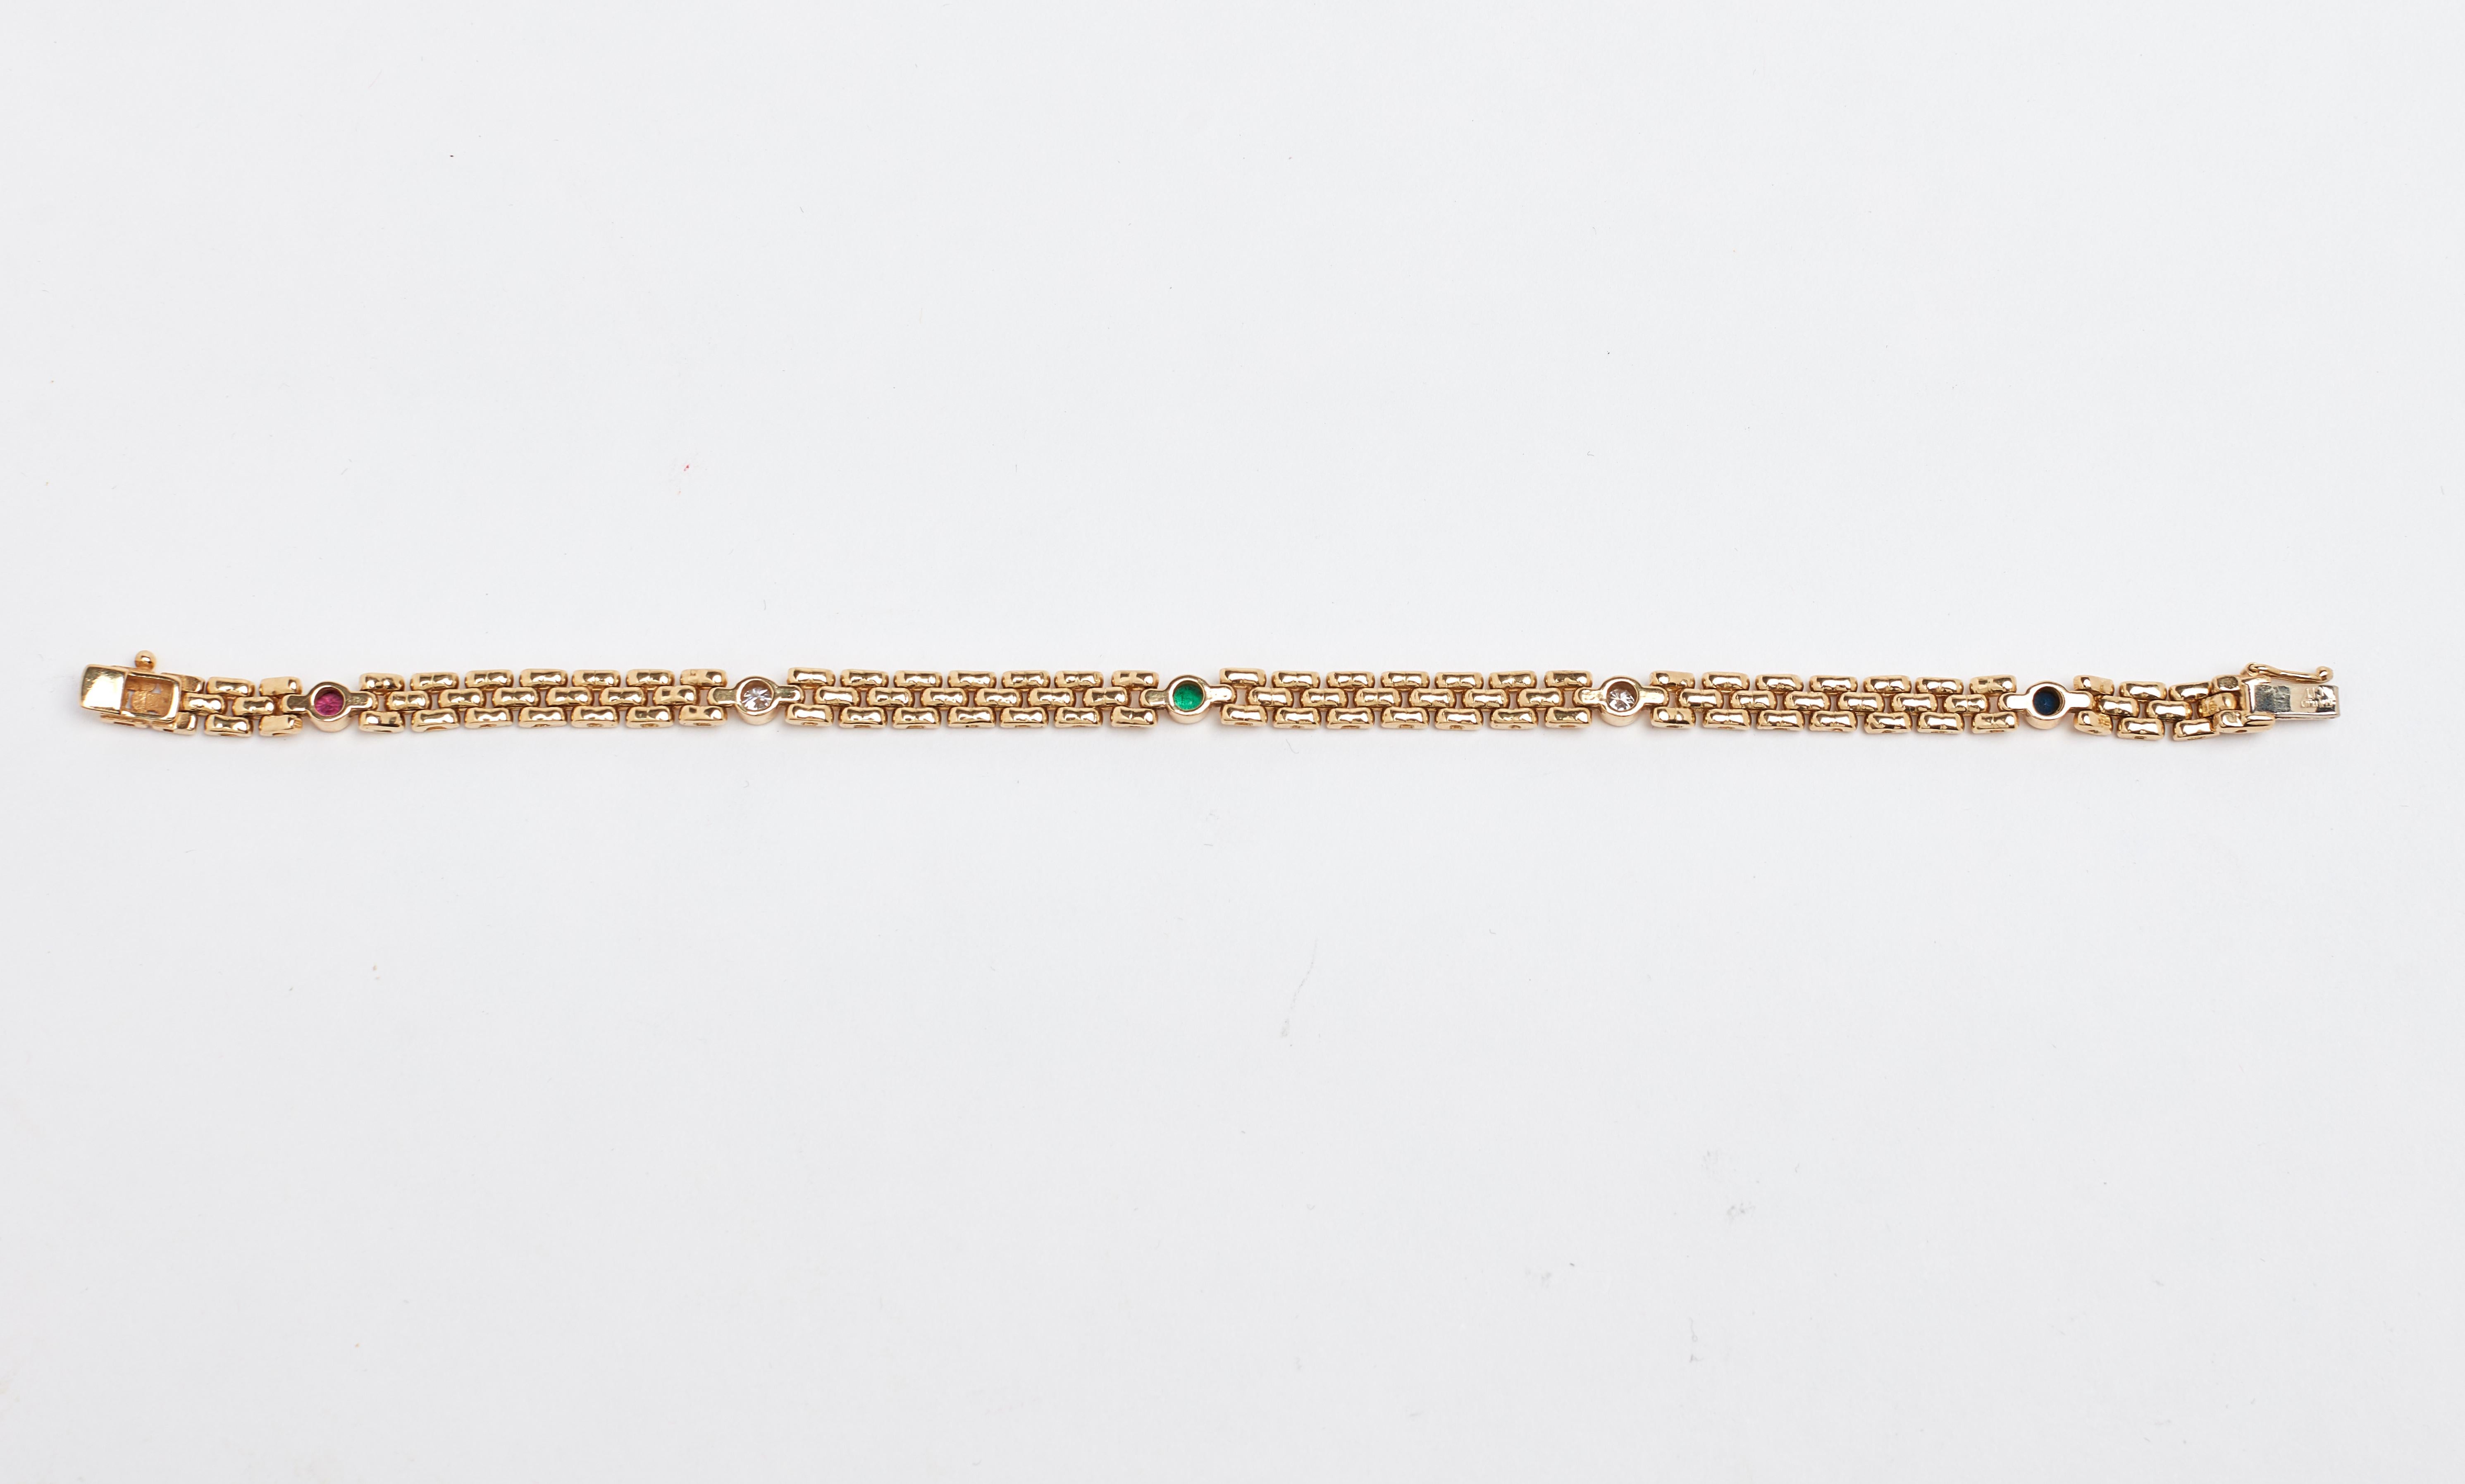 14k yellow gold channel set Diamond Ruby Sapphire and Emerald bracelet. Total weight for all stones is approximately 1 carat total. 7.50 inches long